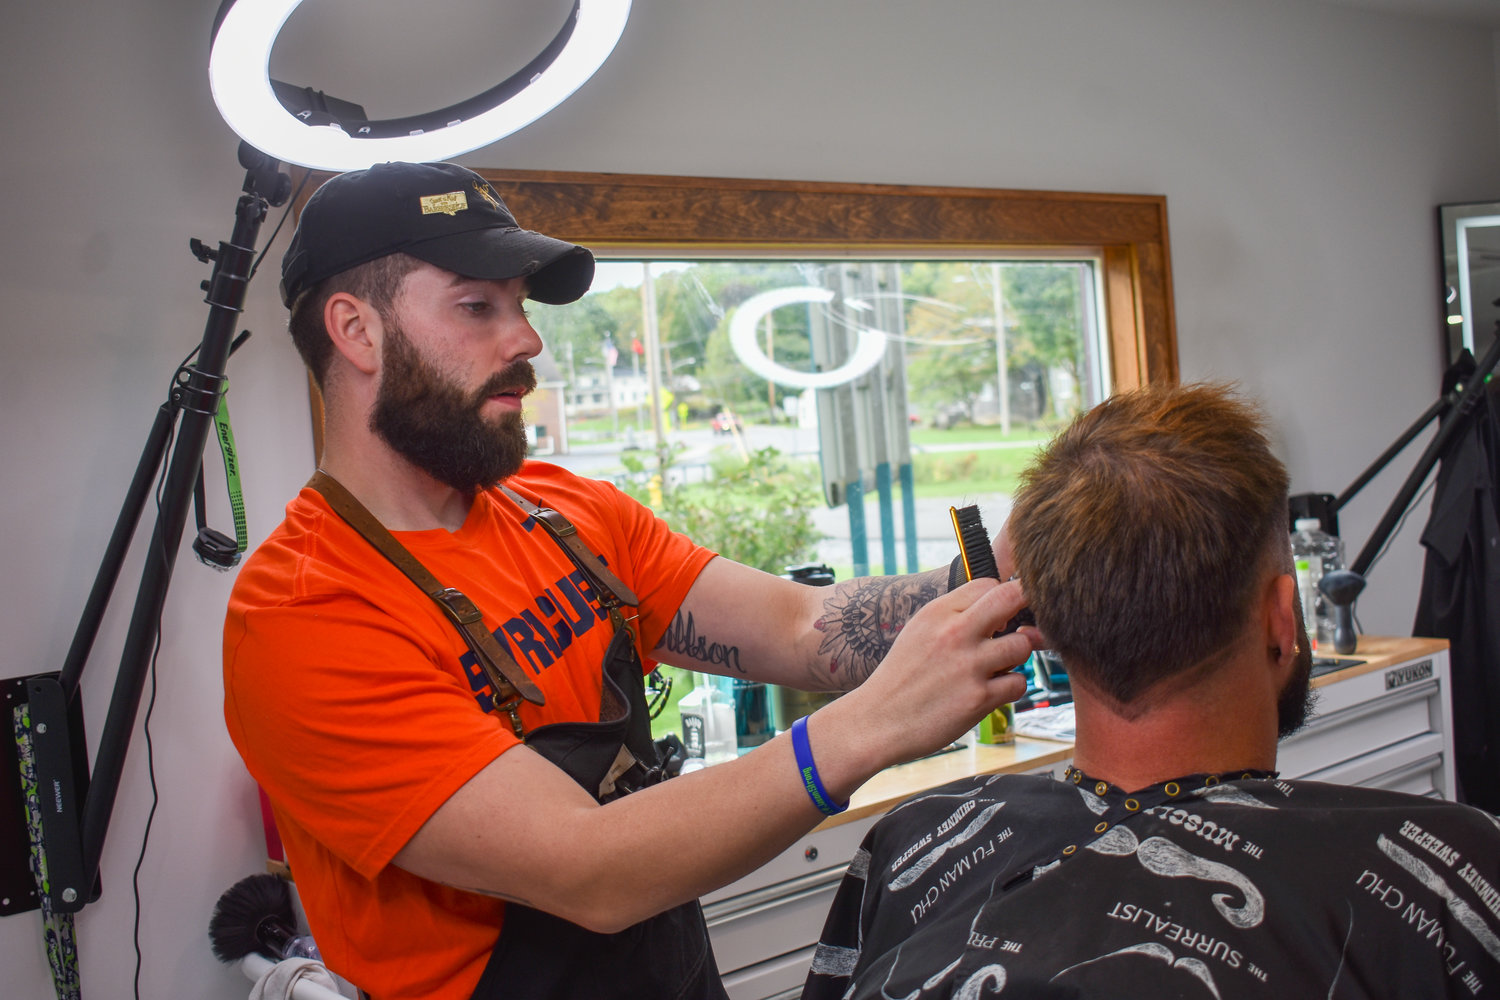 Jared Jillson puts some finishing touches on one of his clients. He's been practicing barbering since he was 15 and now does so professionally out of his business, Clifford's Barber Co., located at 44 Milford Street, Hamilton.